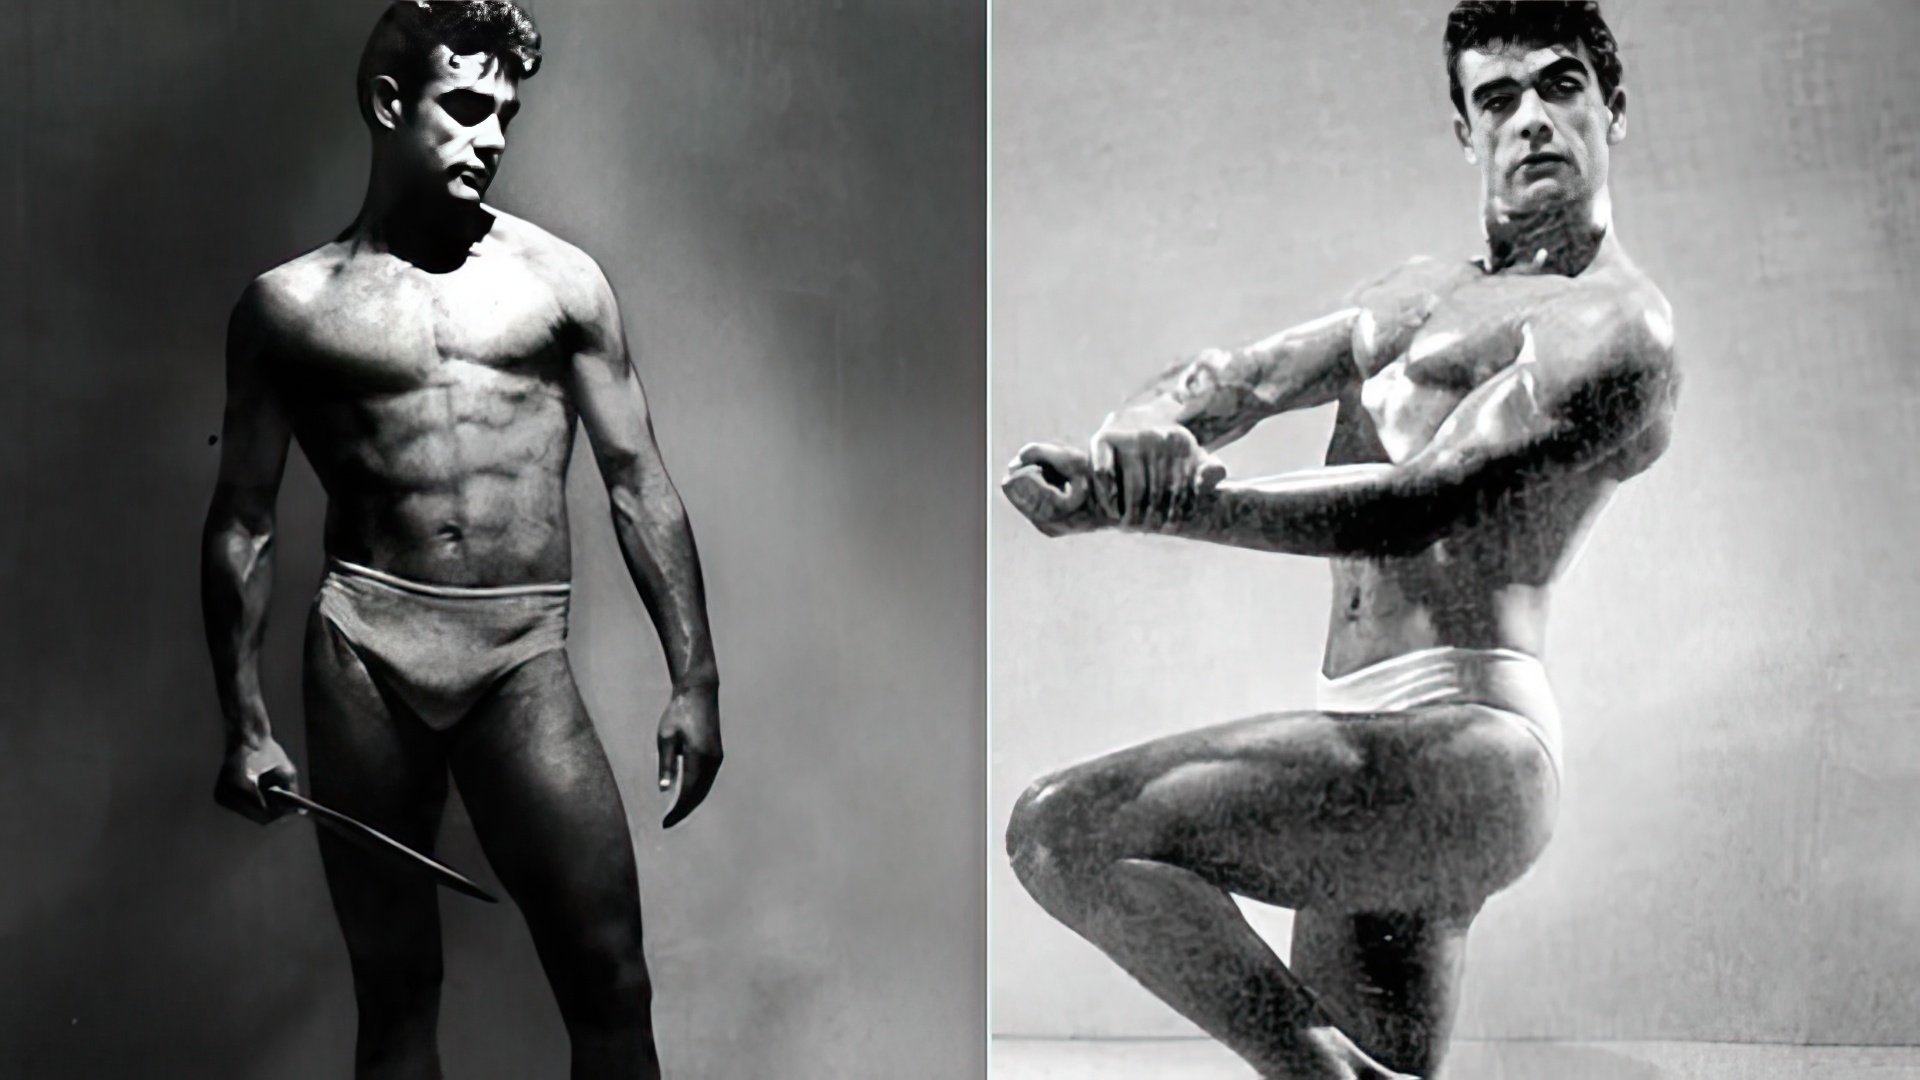 Sean Connery was fond of bodybuilding in his youth